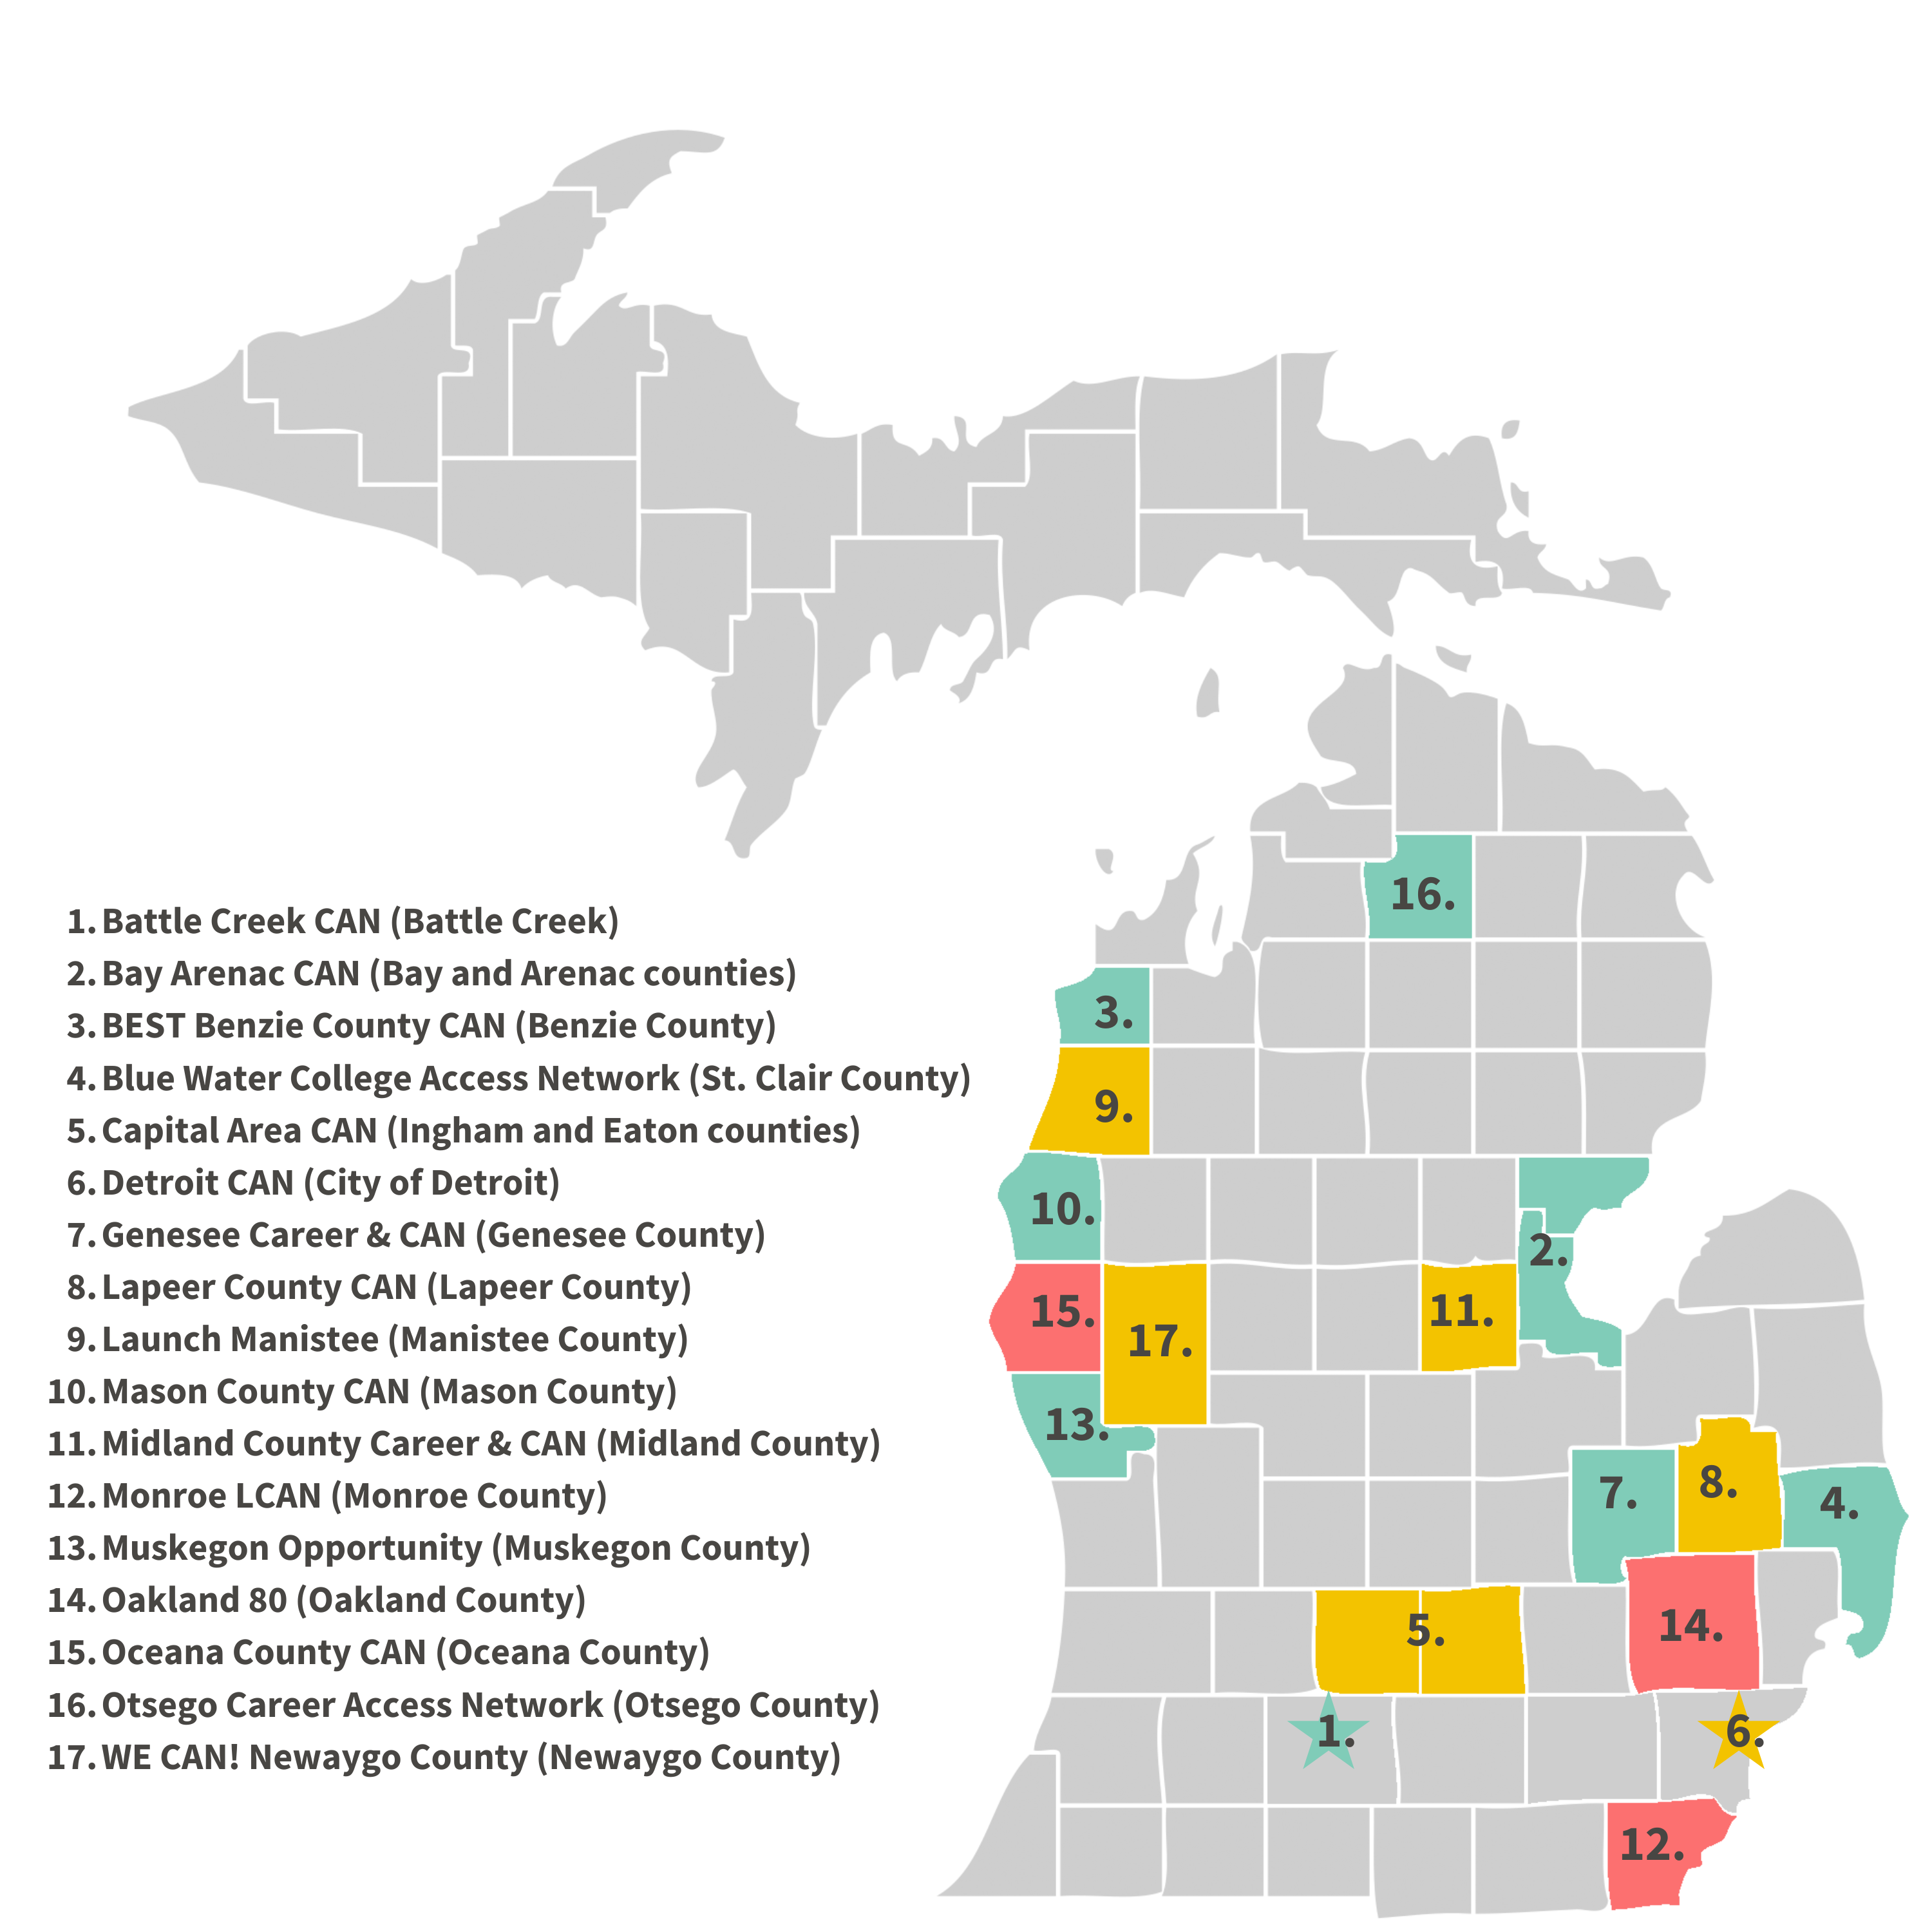 Map of LCANs in Michigan